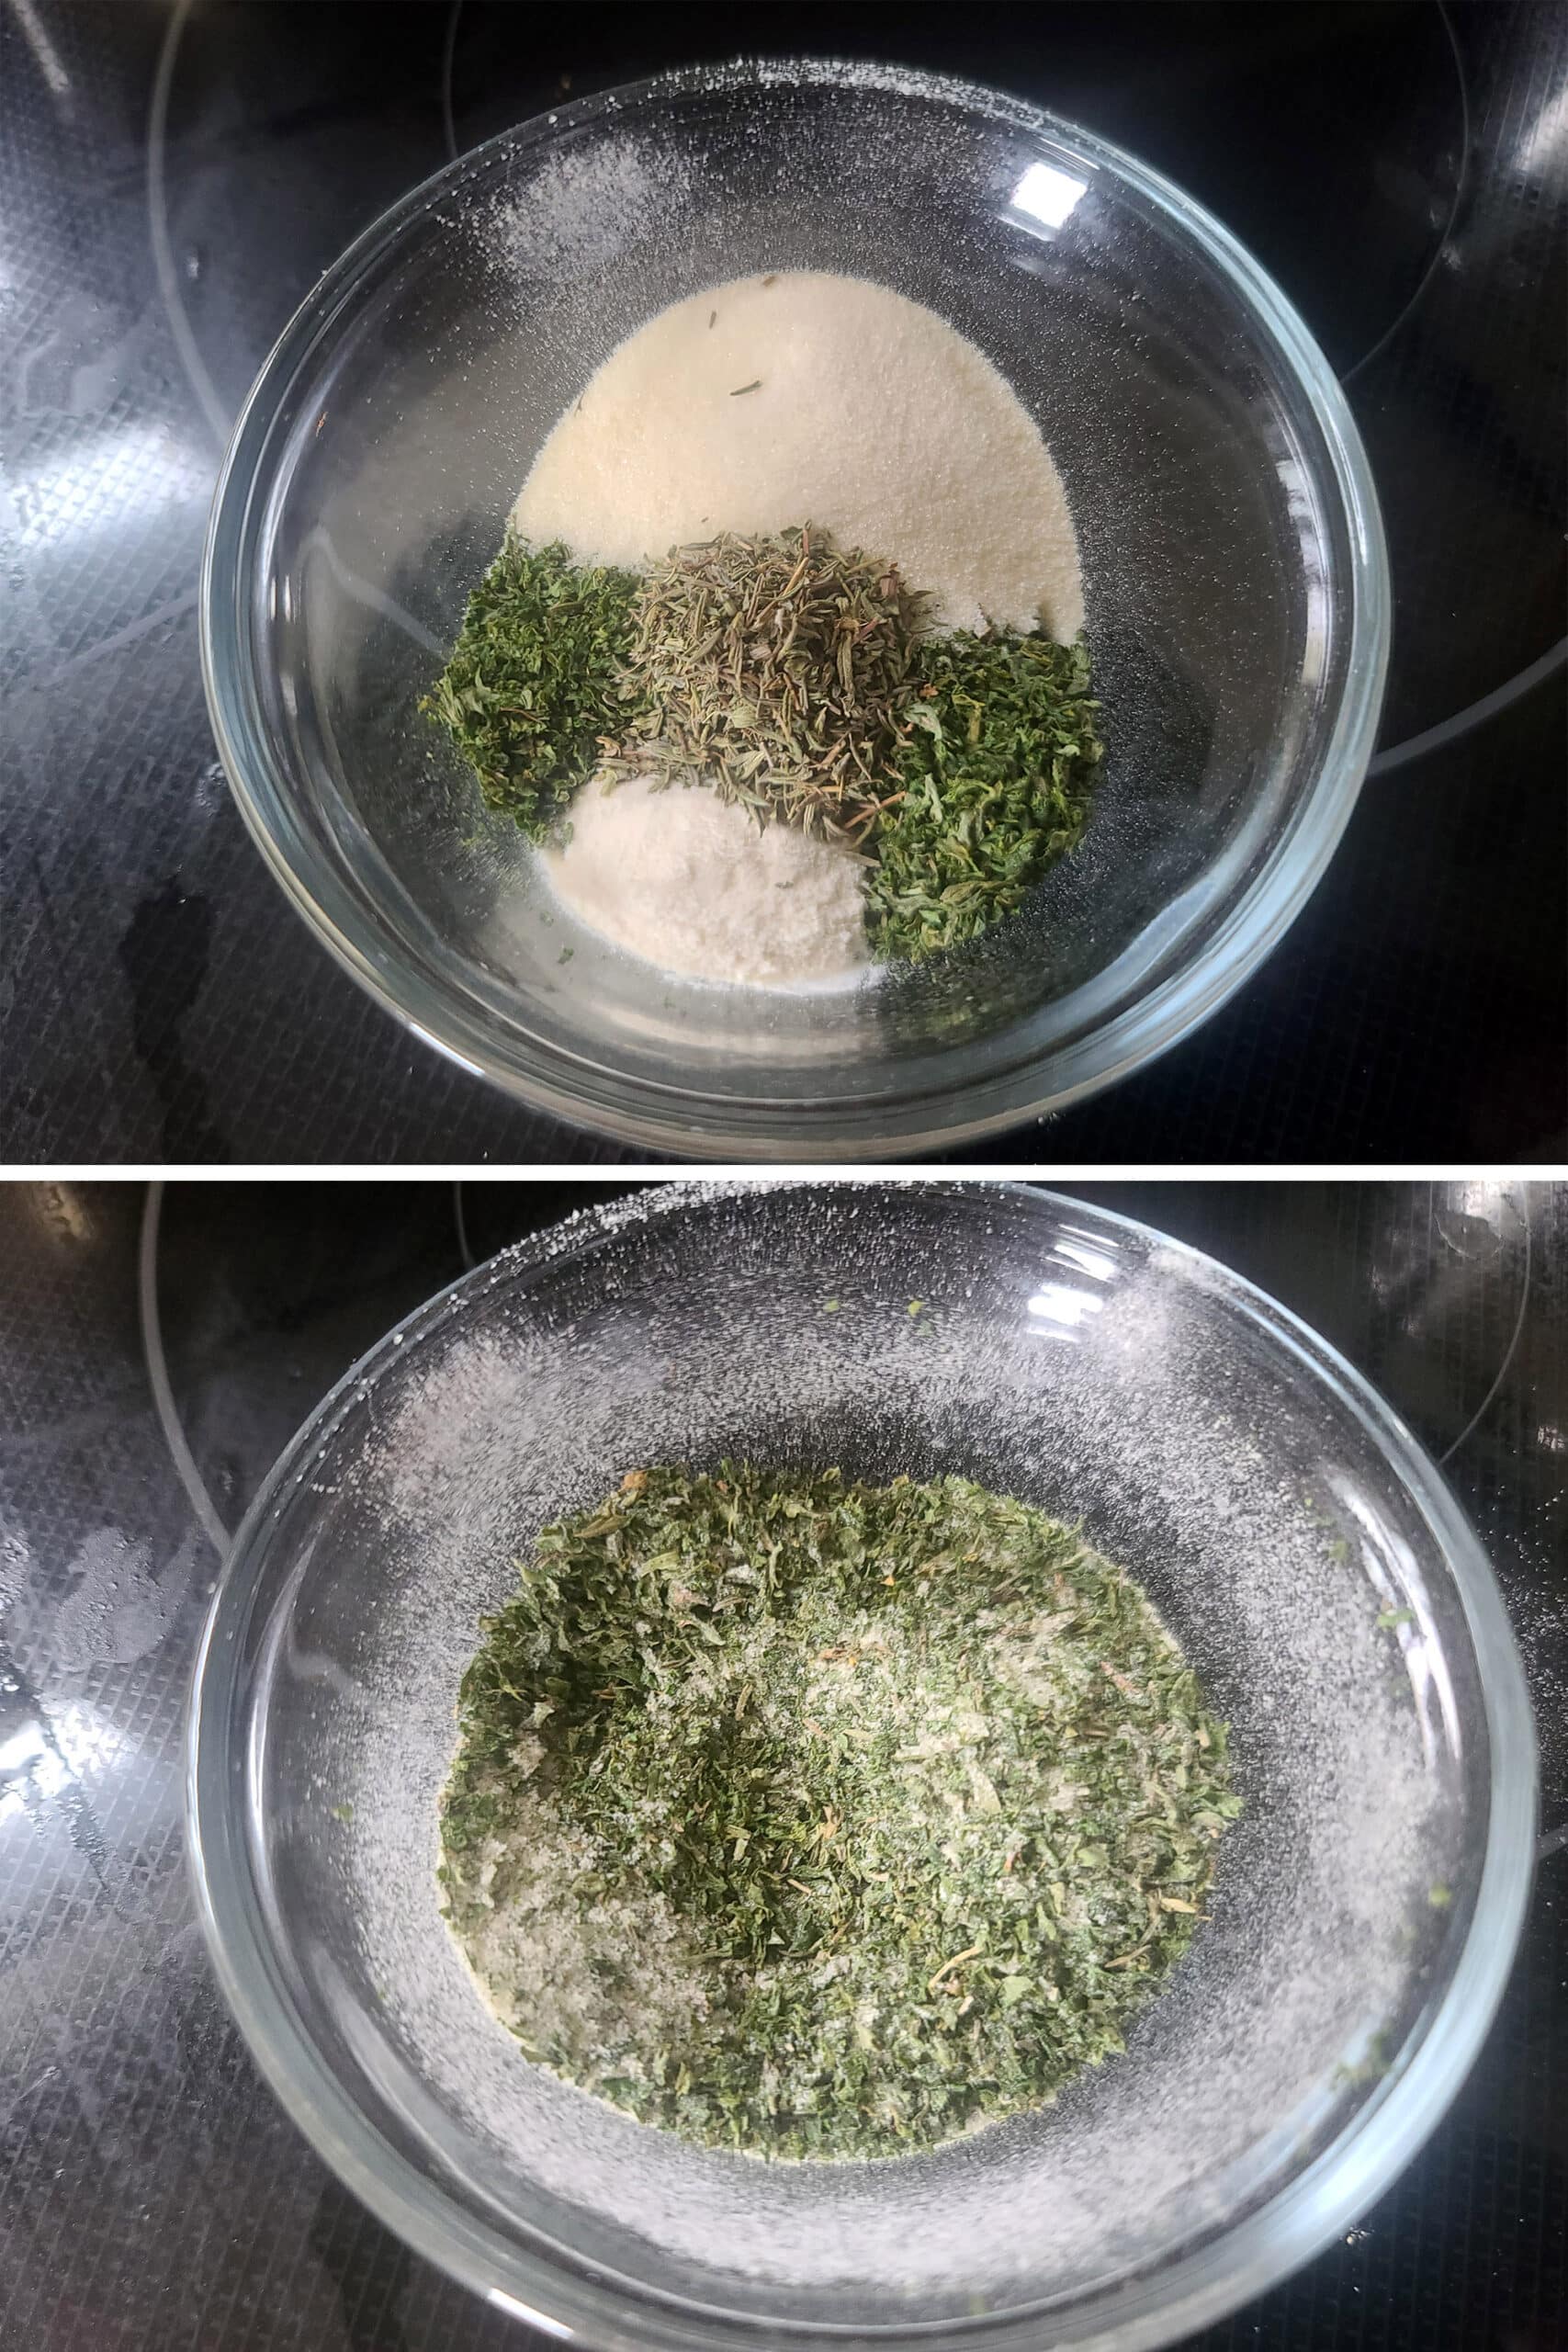 A 2 part image showing the dried herbs, gelatin, and xanthan gum being mixed in a small bowl.